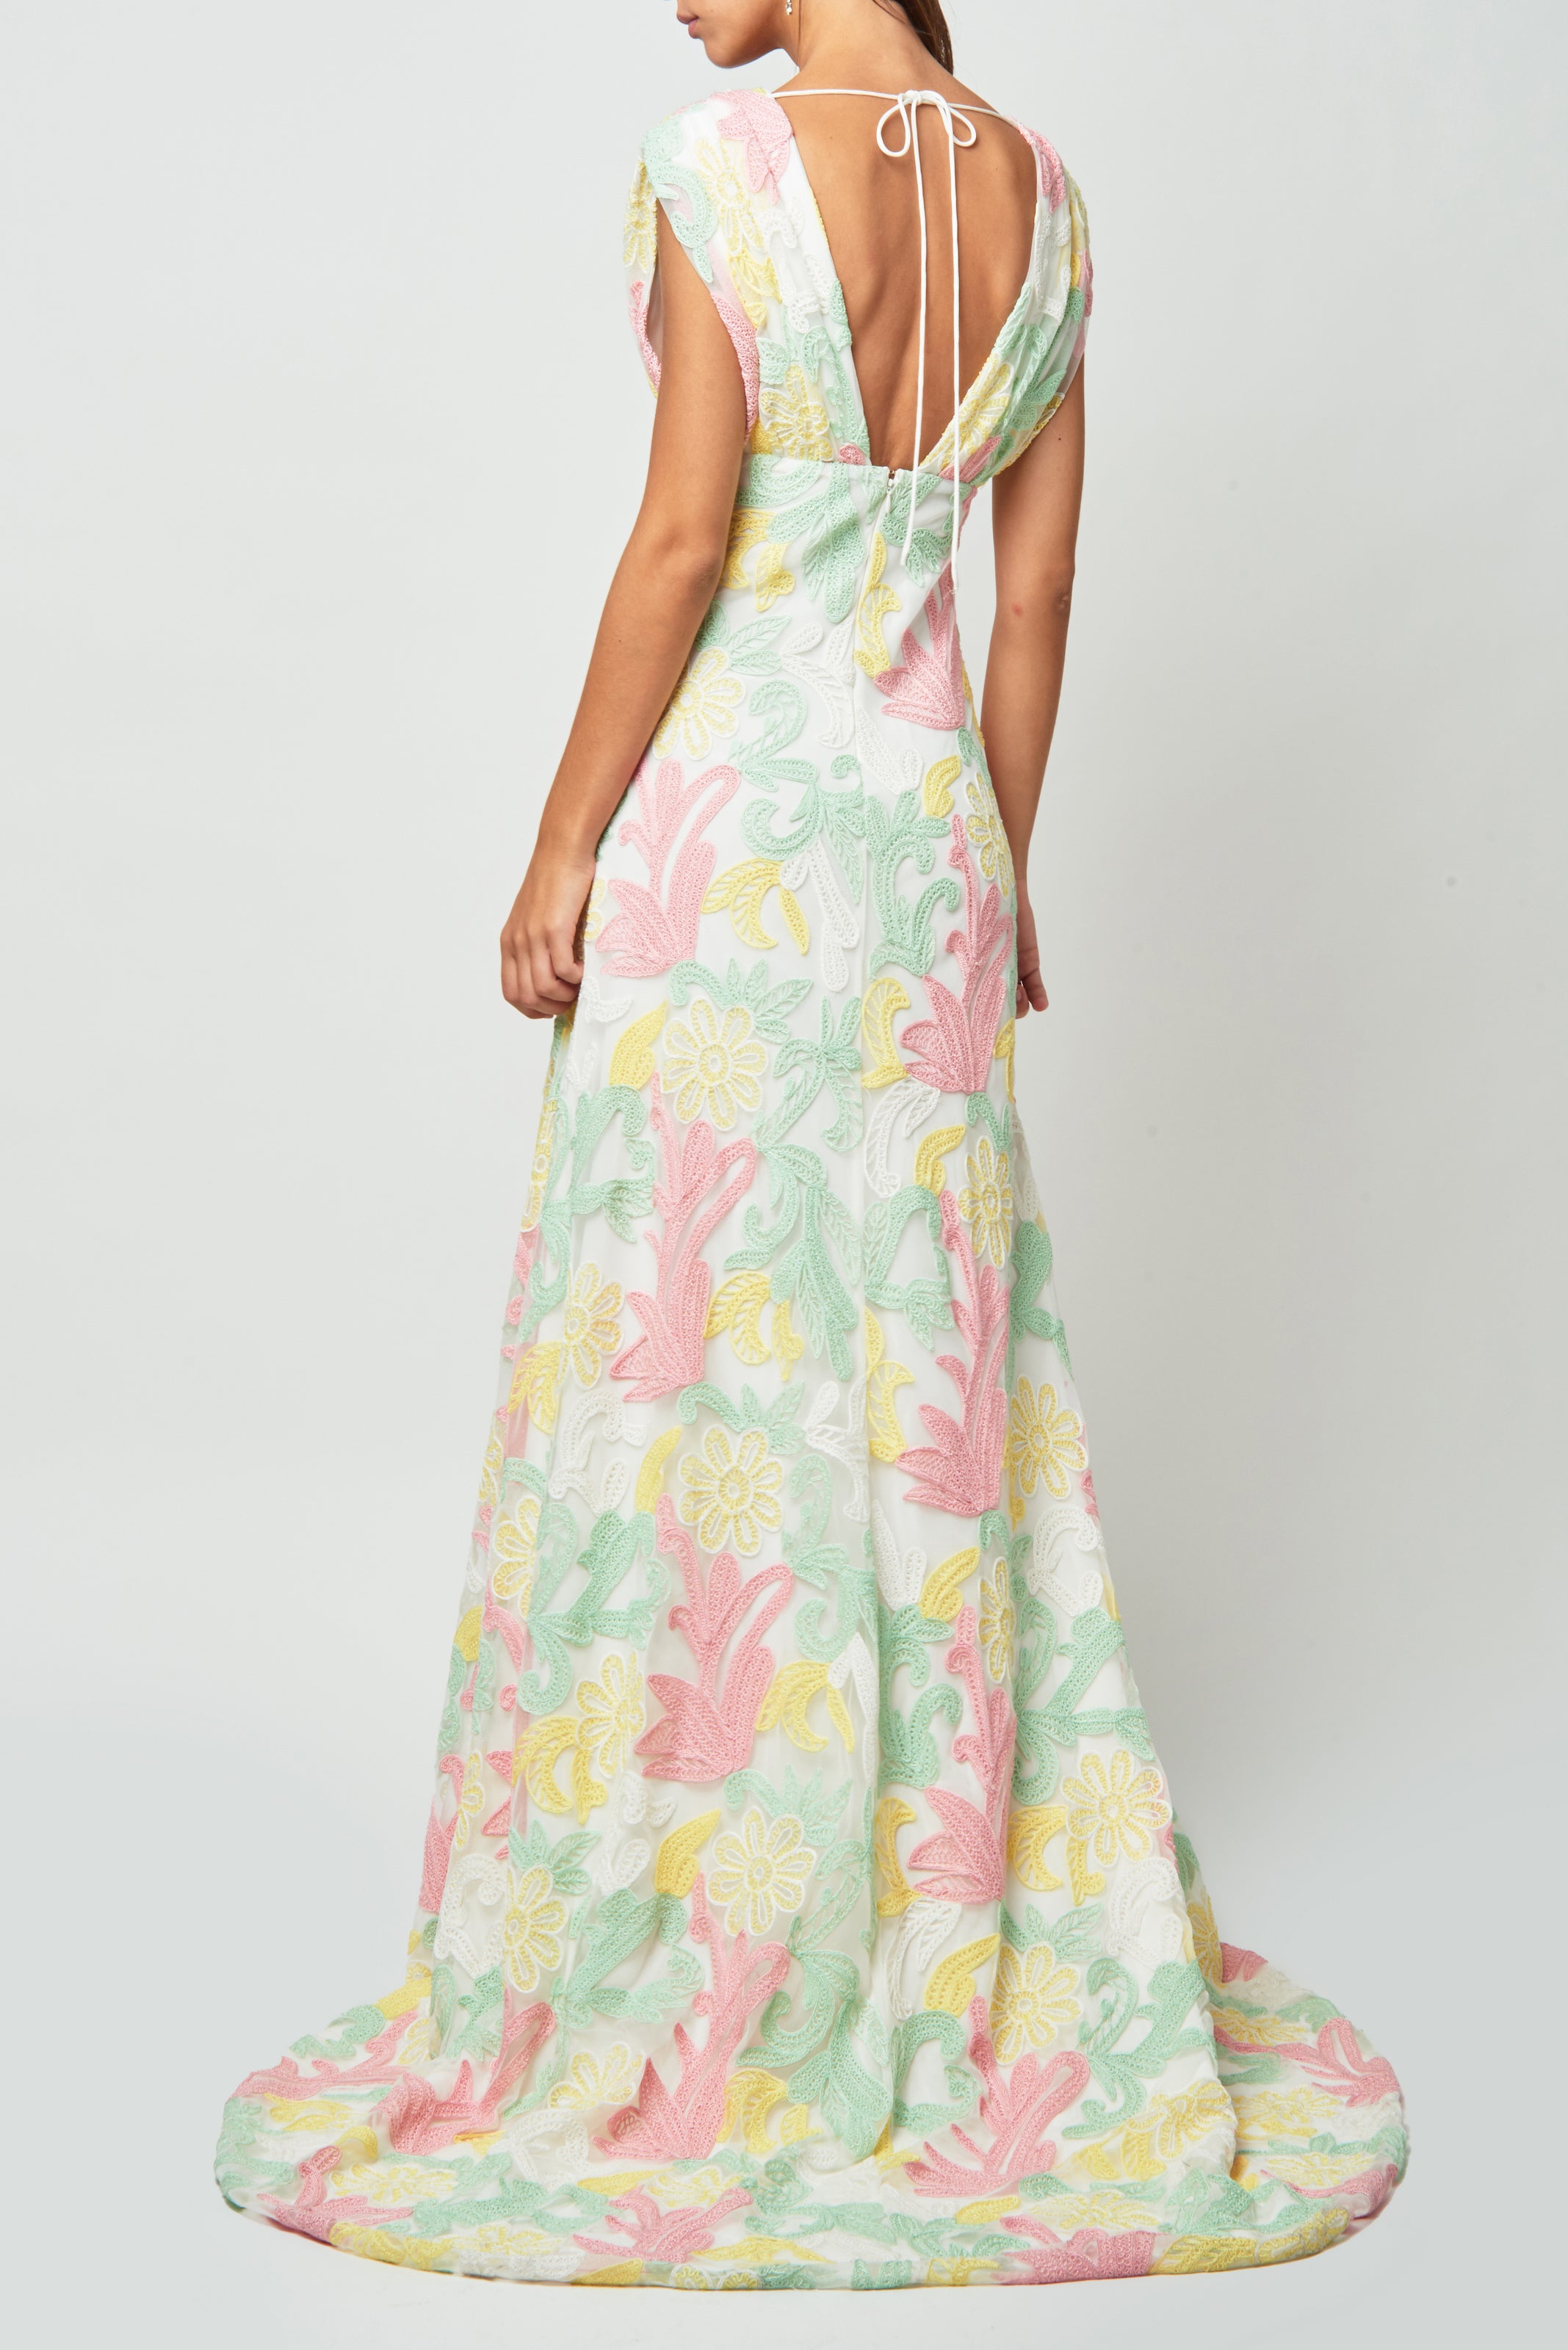 Aurora Multi-Colored Floral Lace Gown